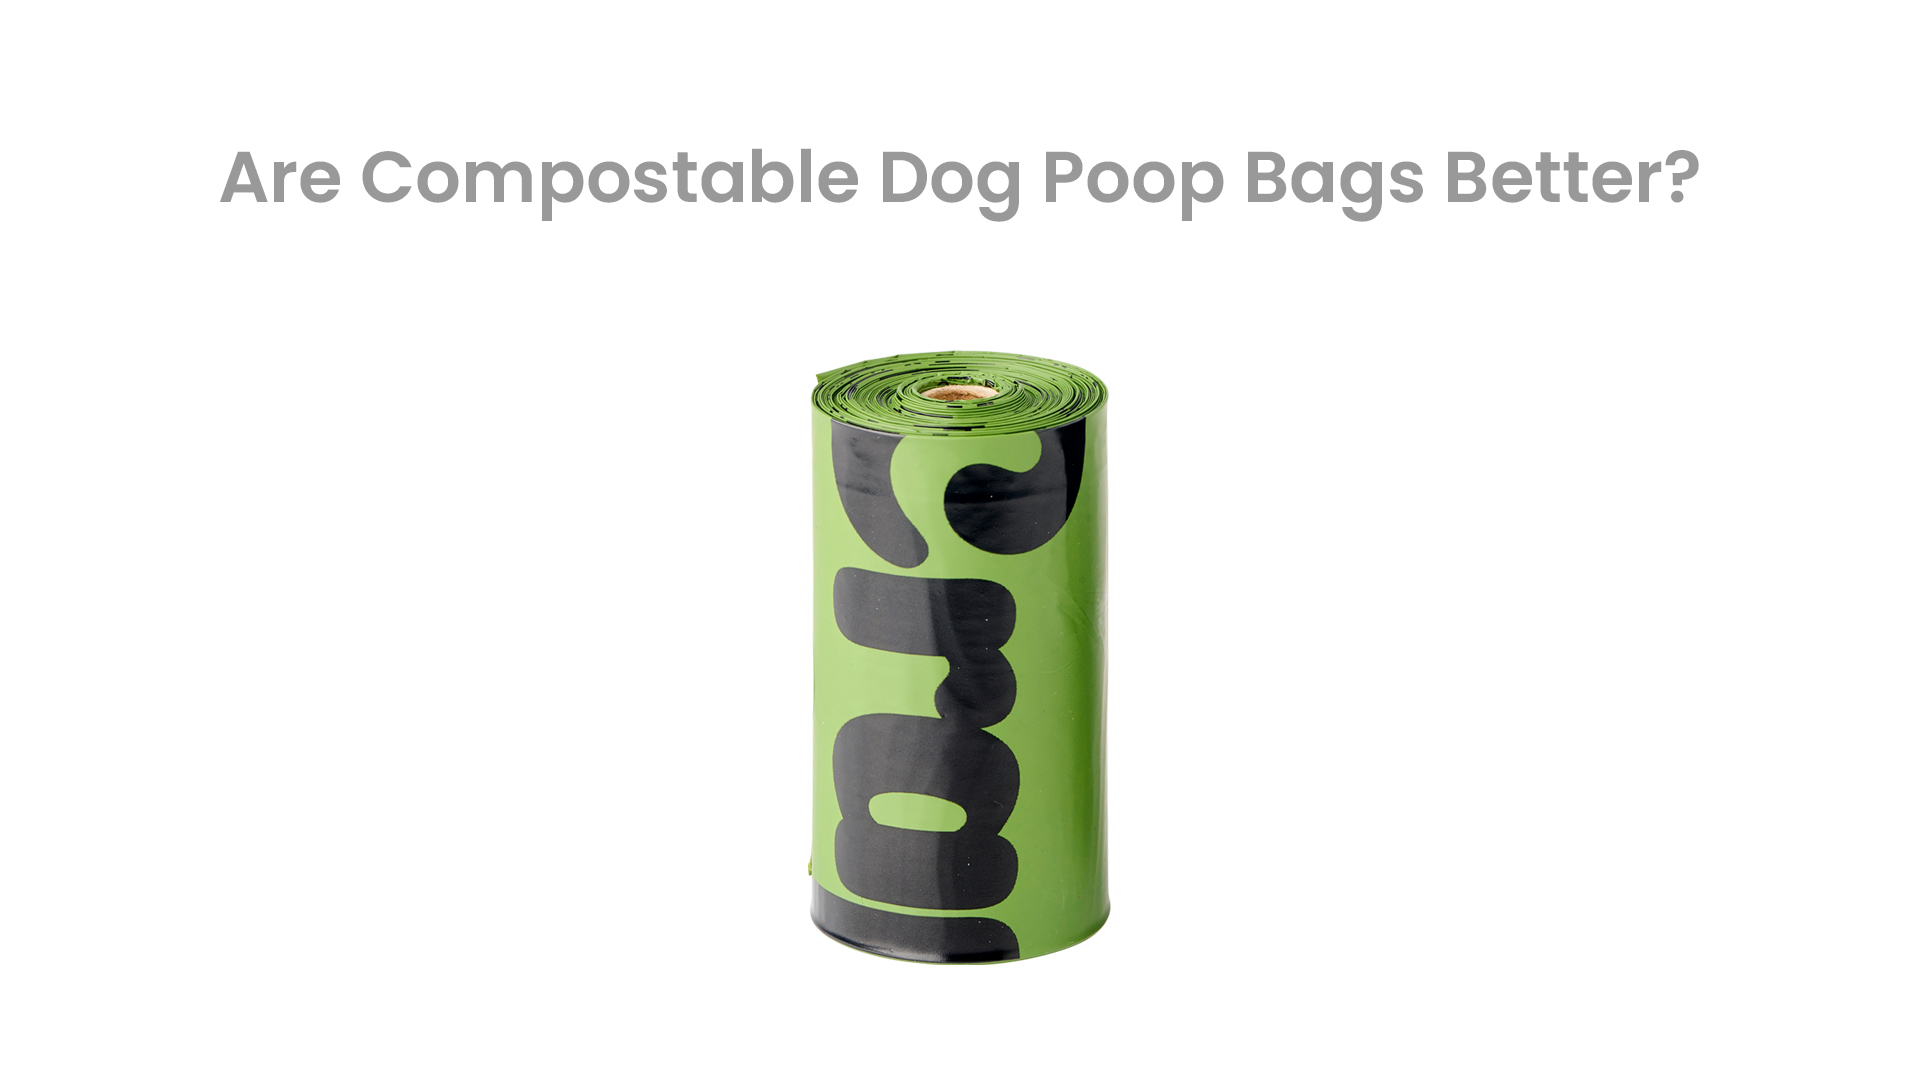 Are Compostable Dog Poop Bags Better? Let's Find Out - Oh Crap